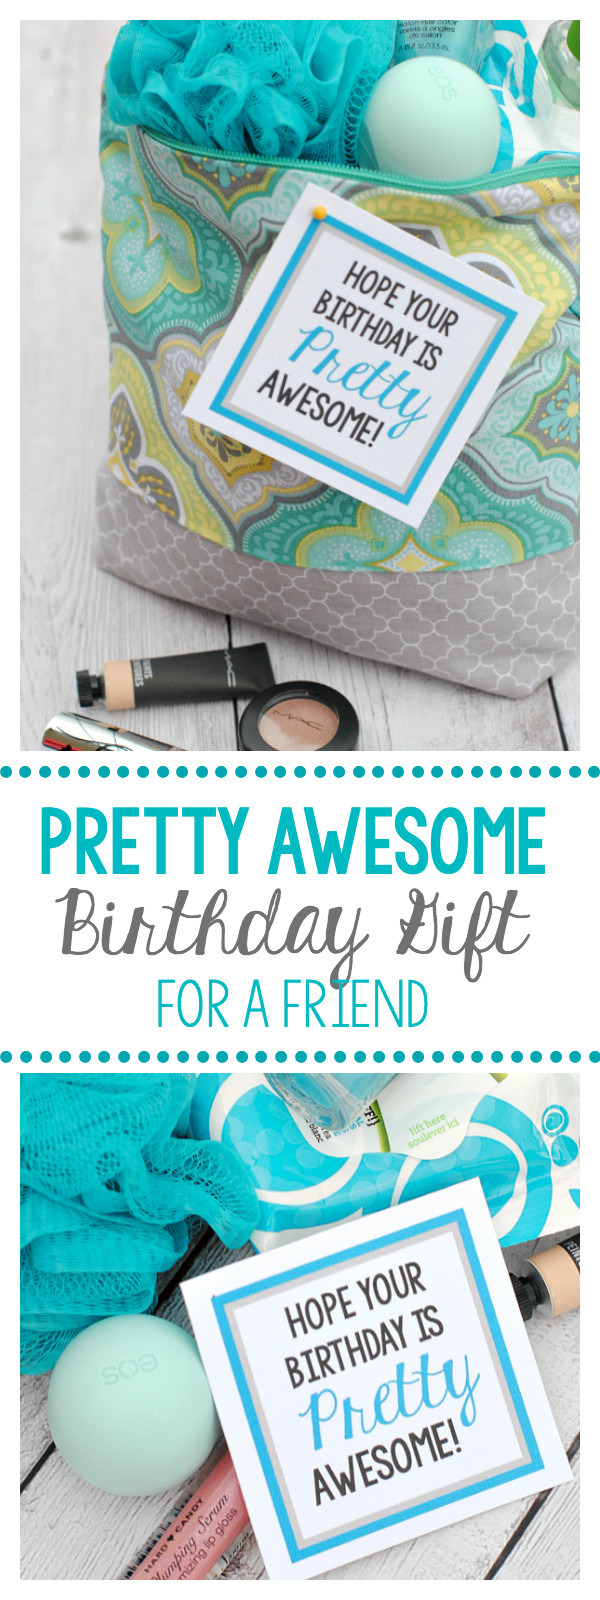 Birthday Gifts Pinterest
 "Pretty Awesome" Makeup Gifts for a Friend Mom or Teacher